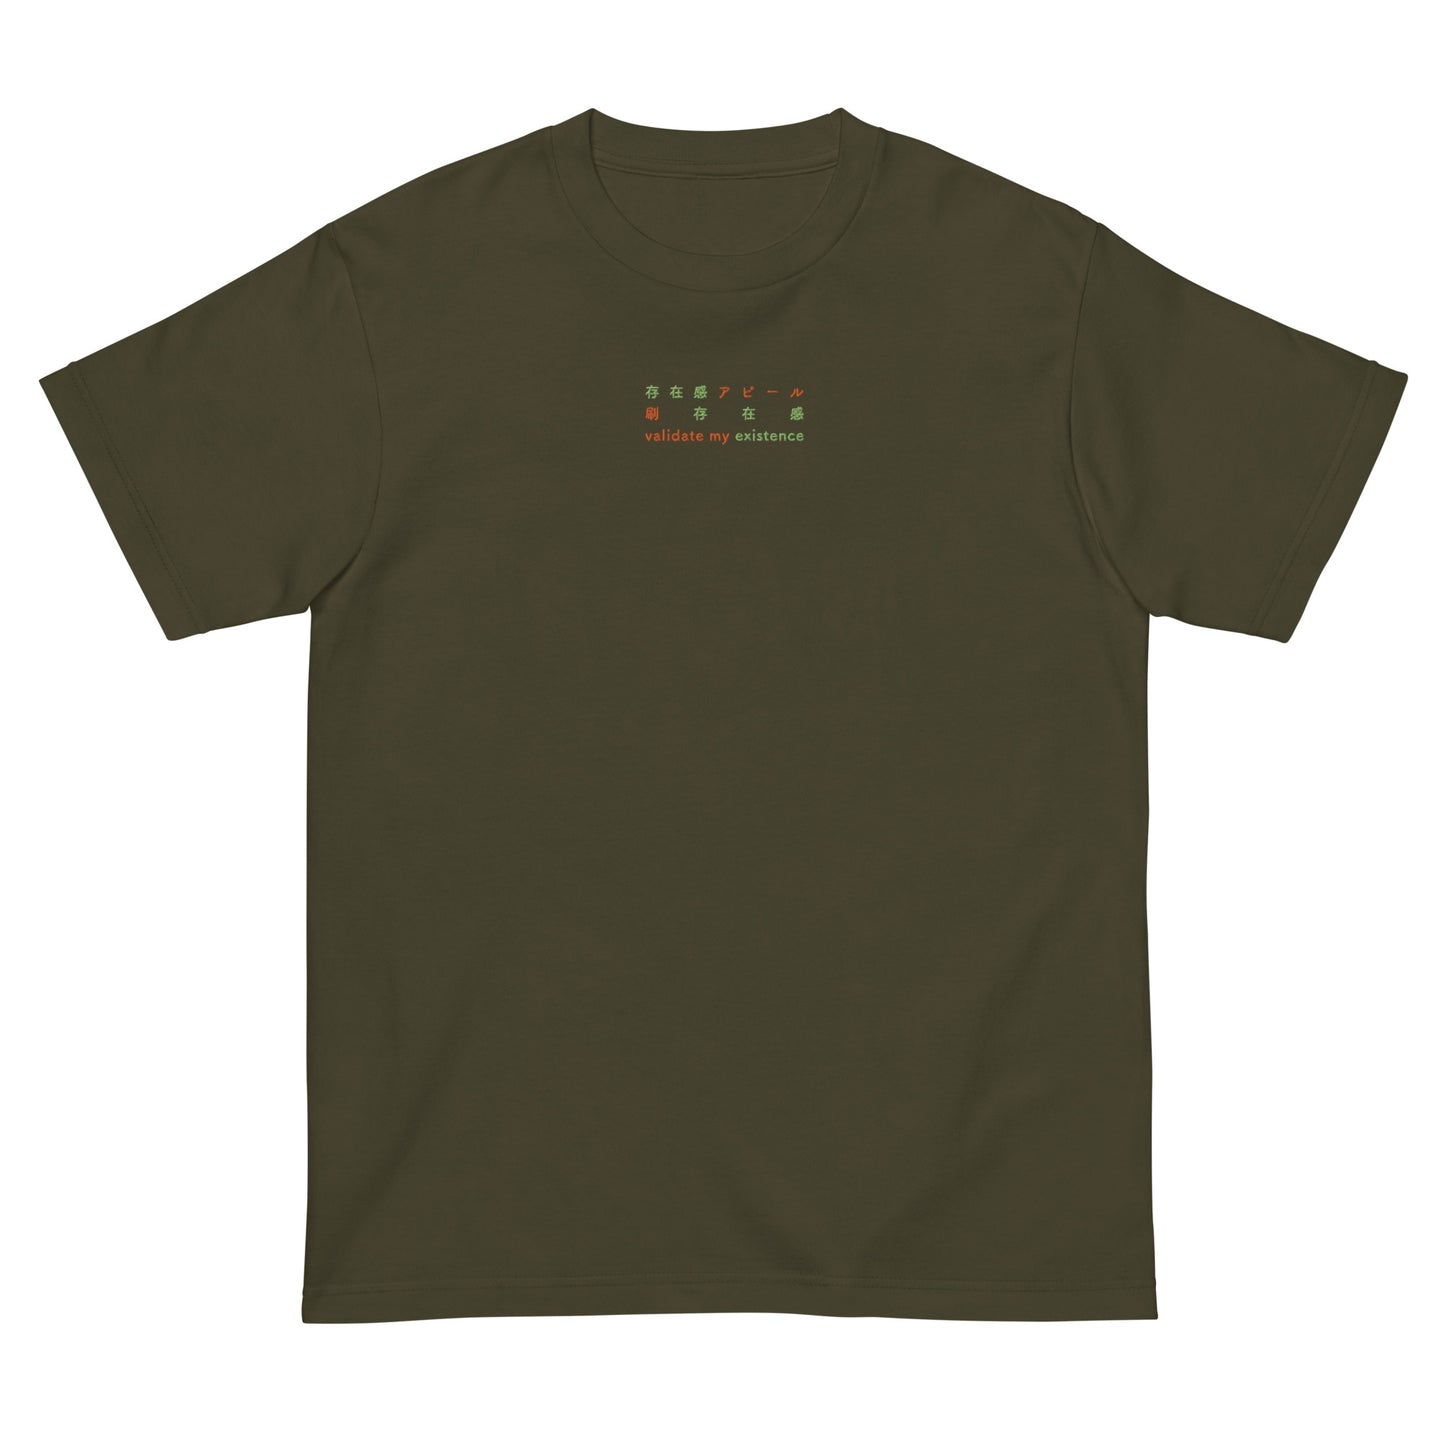 Green High Quality Tee - Front Design with an Orange,Green Embroidery "Validate my Existence" in Japanese,Chinese and English